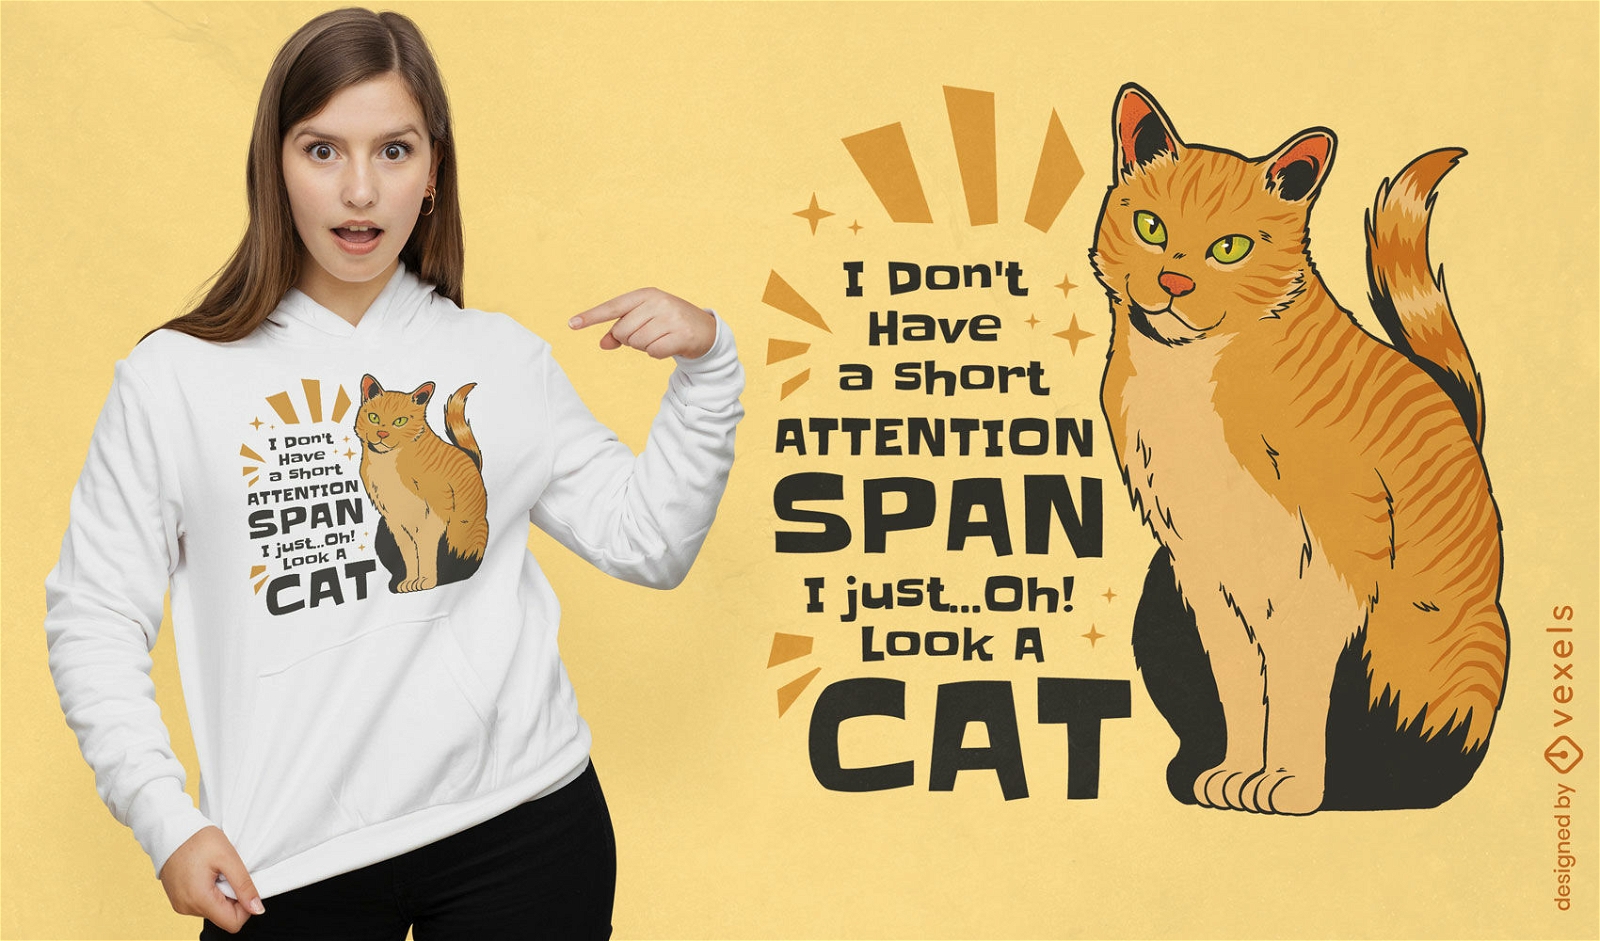 Attention tspan cat quote t-shirt design